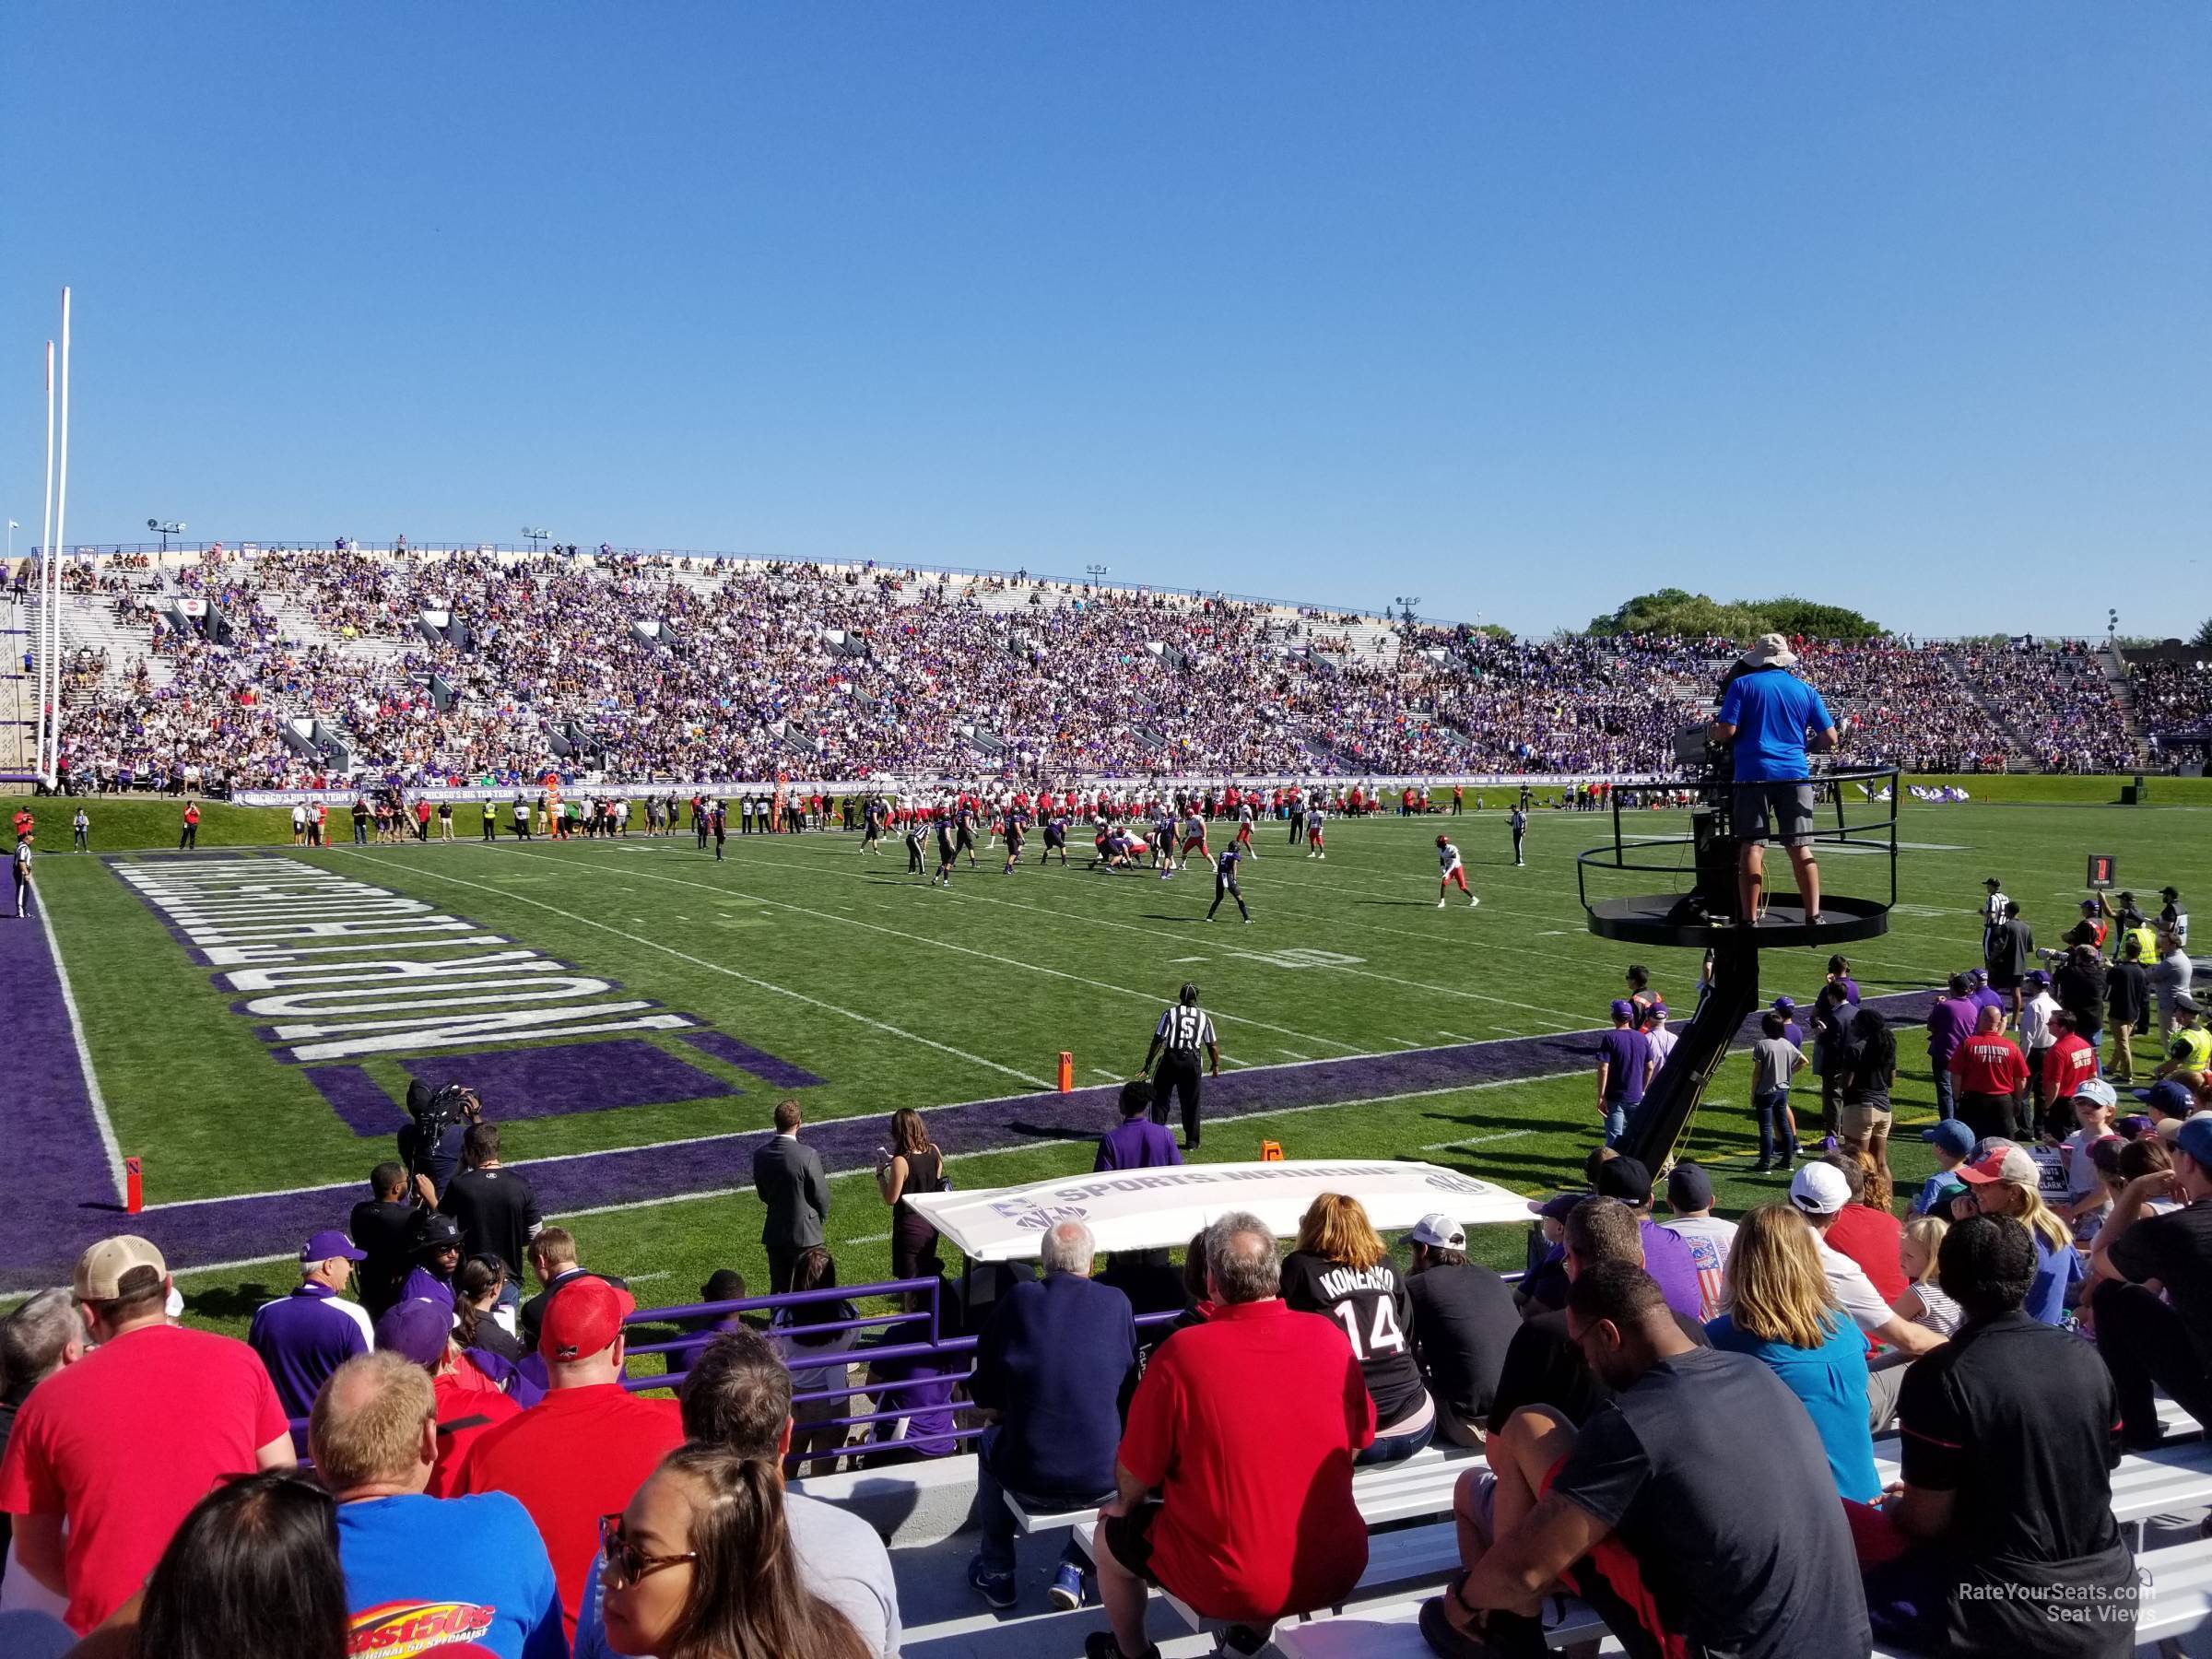 section 134, row 9 seat view  - ryan field